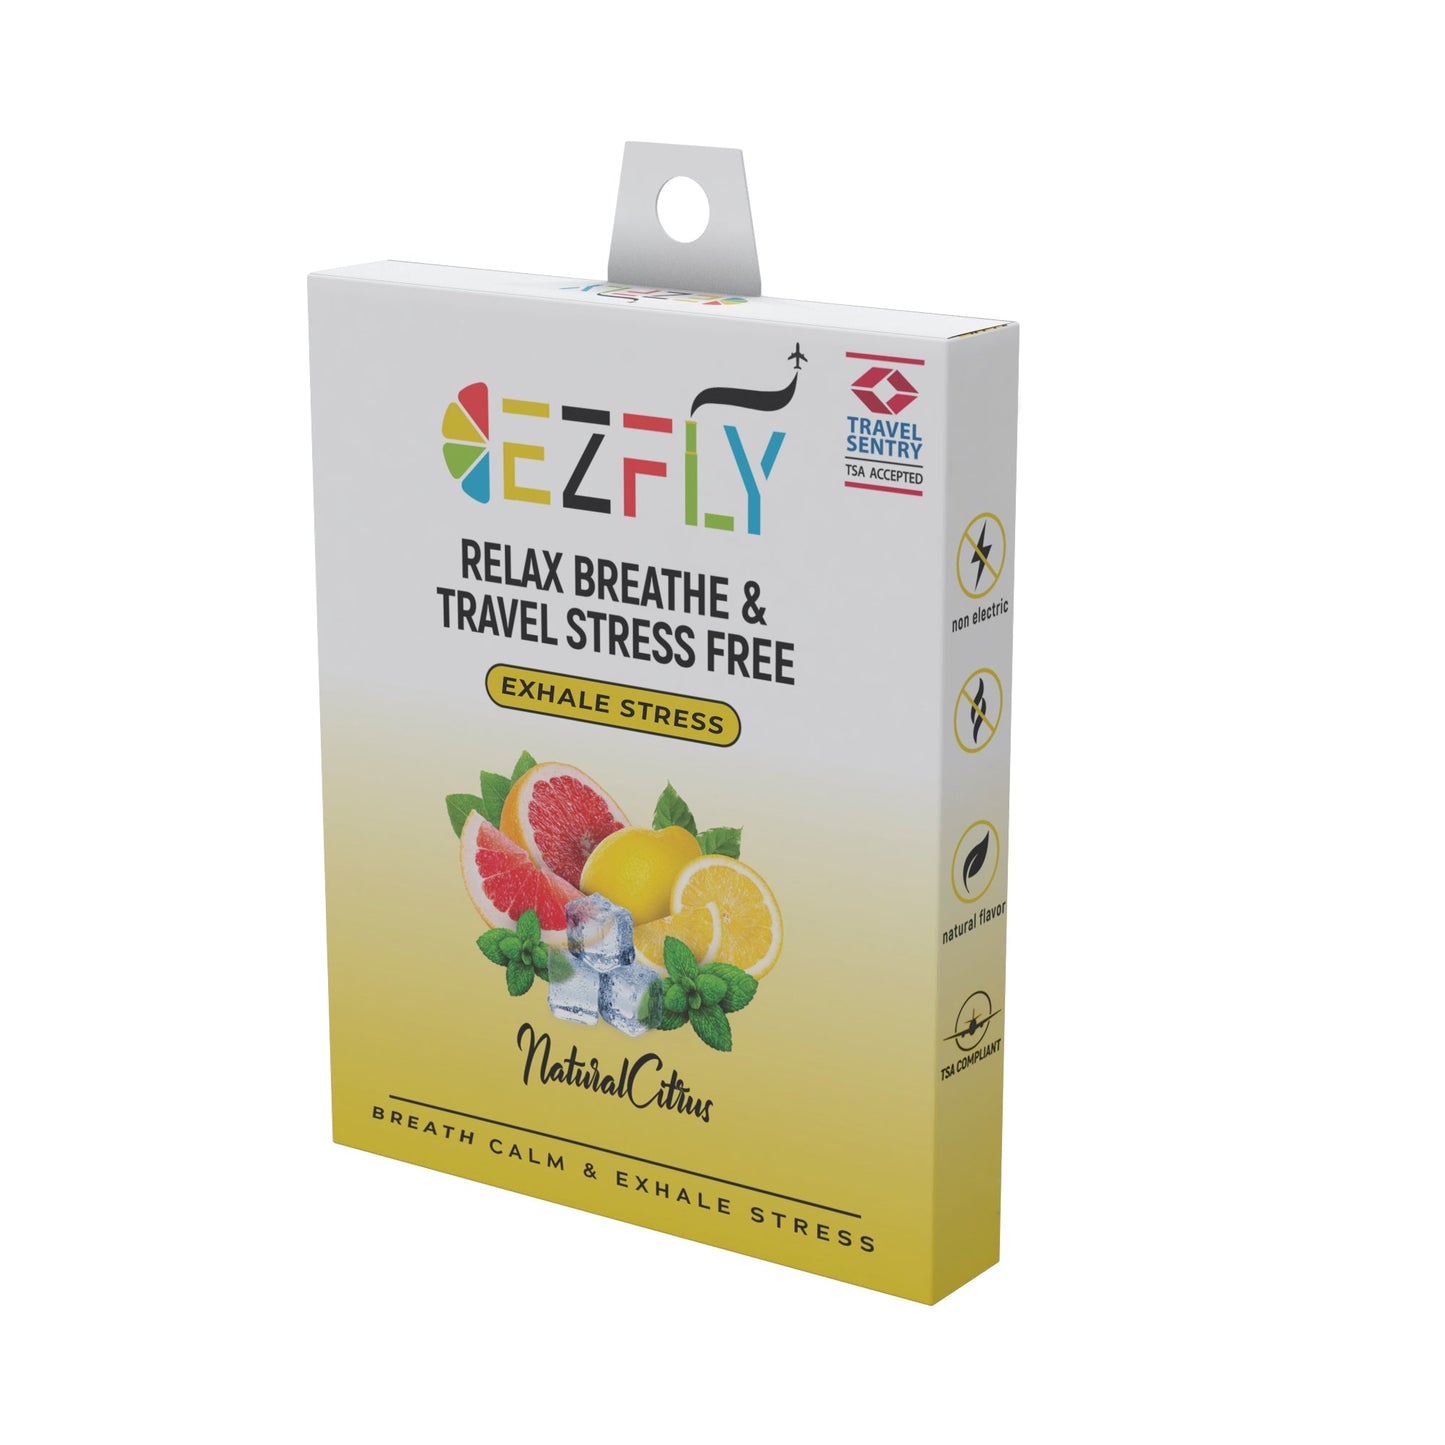 EZFLY: TSA-Accepted Non-Electric Smokeless Flavored Air Puffer Inhaler - Your Delicious & Refreshing In-Flight Oral Fixation Alternative, 4 Flavor Variety Pack